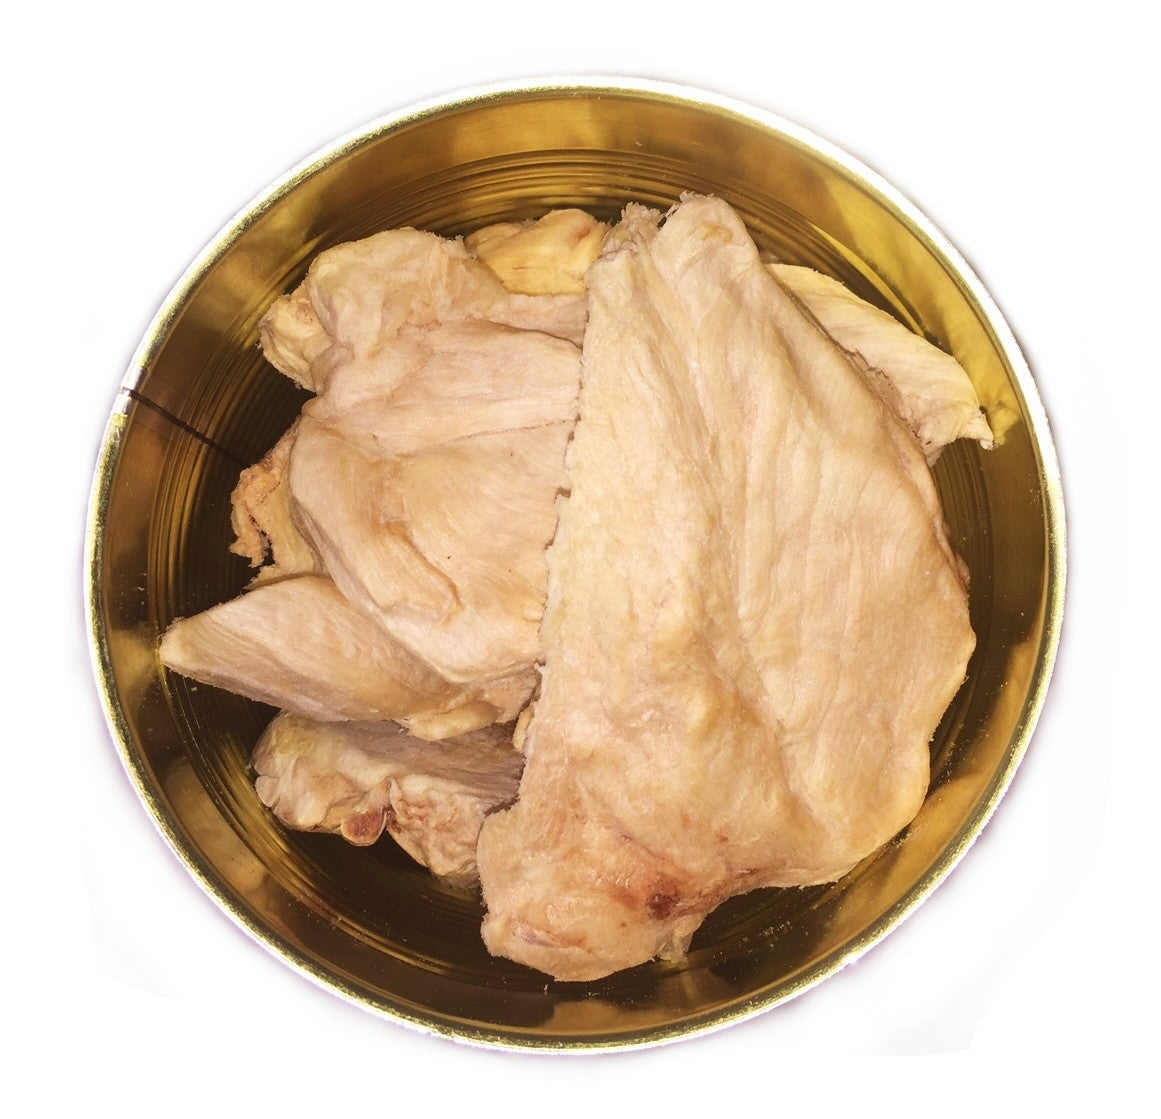 Military Surplus Freeze Dried Whole Chicken Breasts